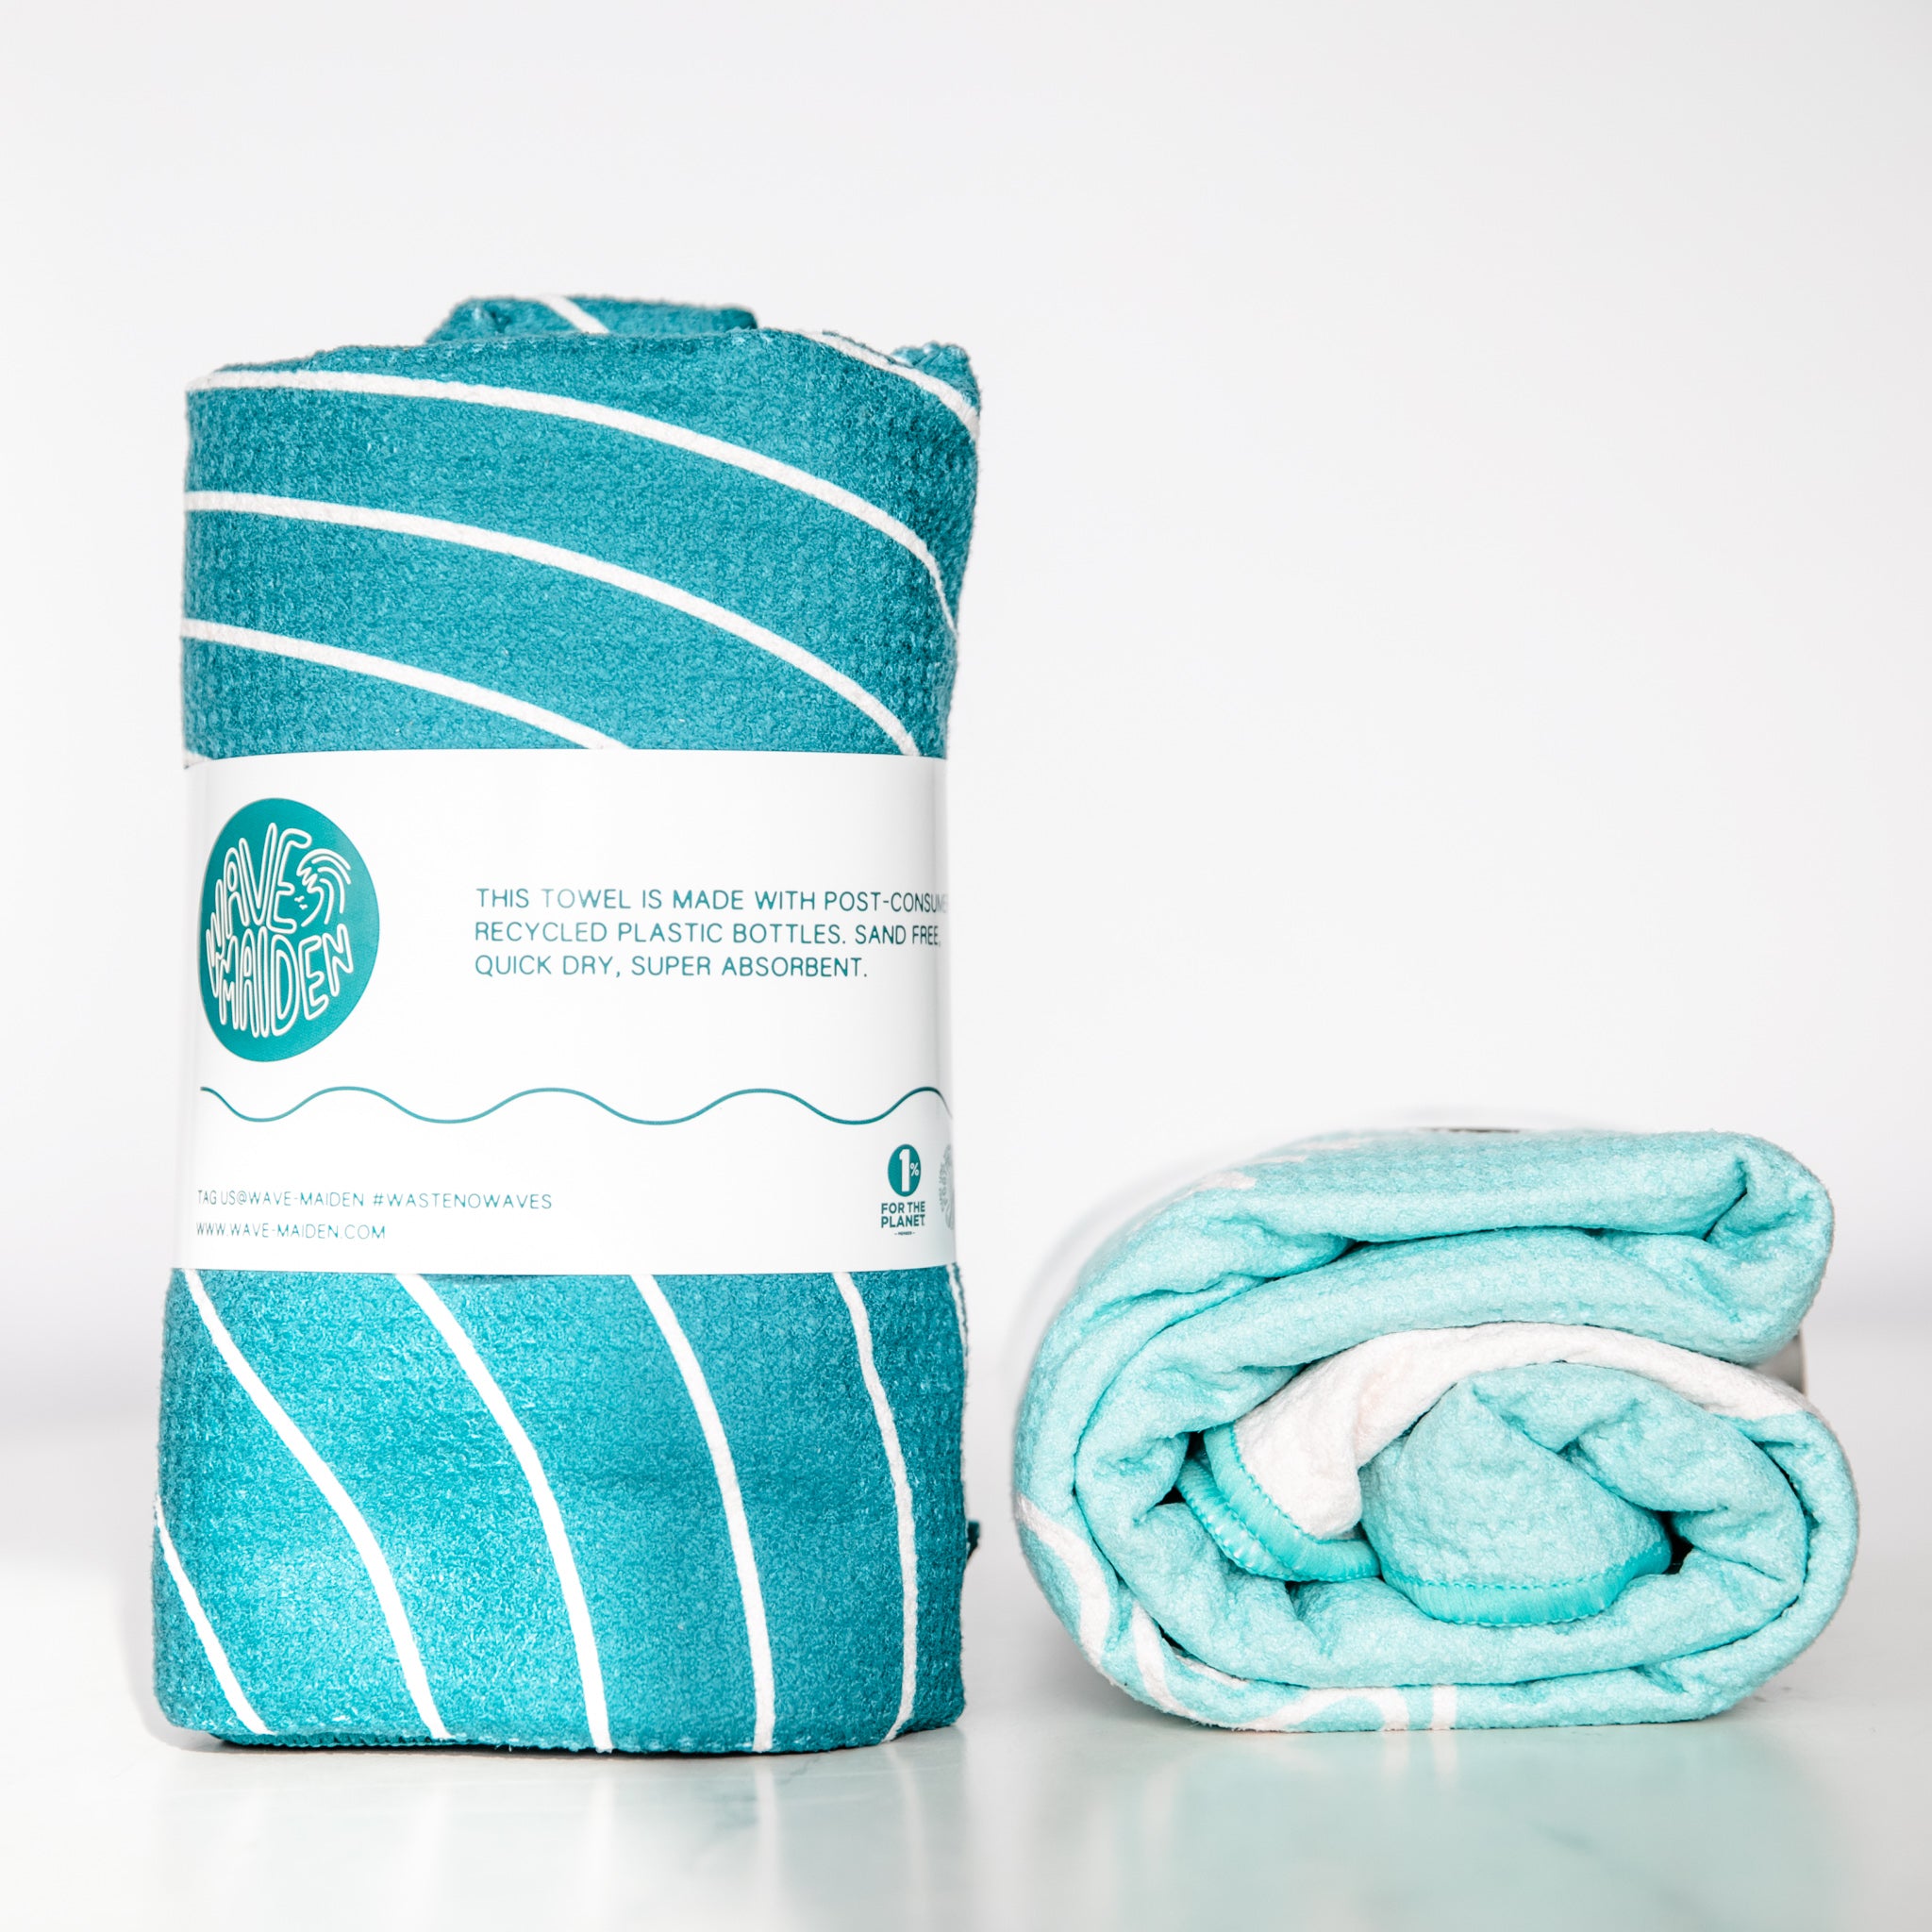 Sand Resistant Eco Towel that Benefits the Planet